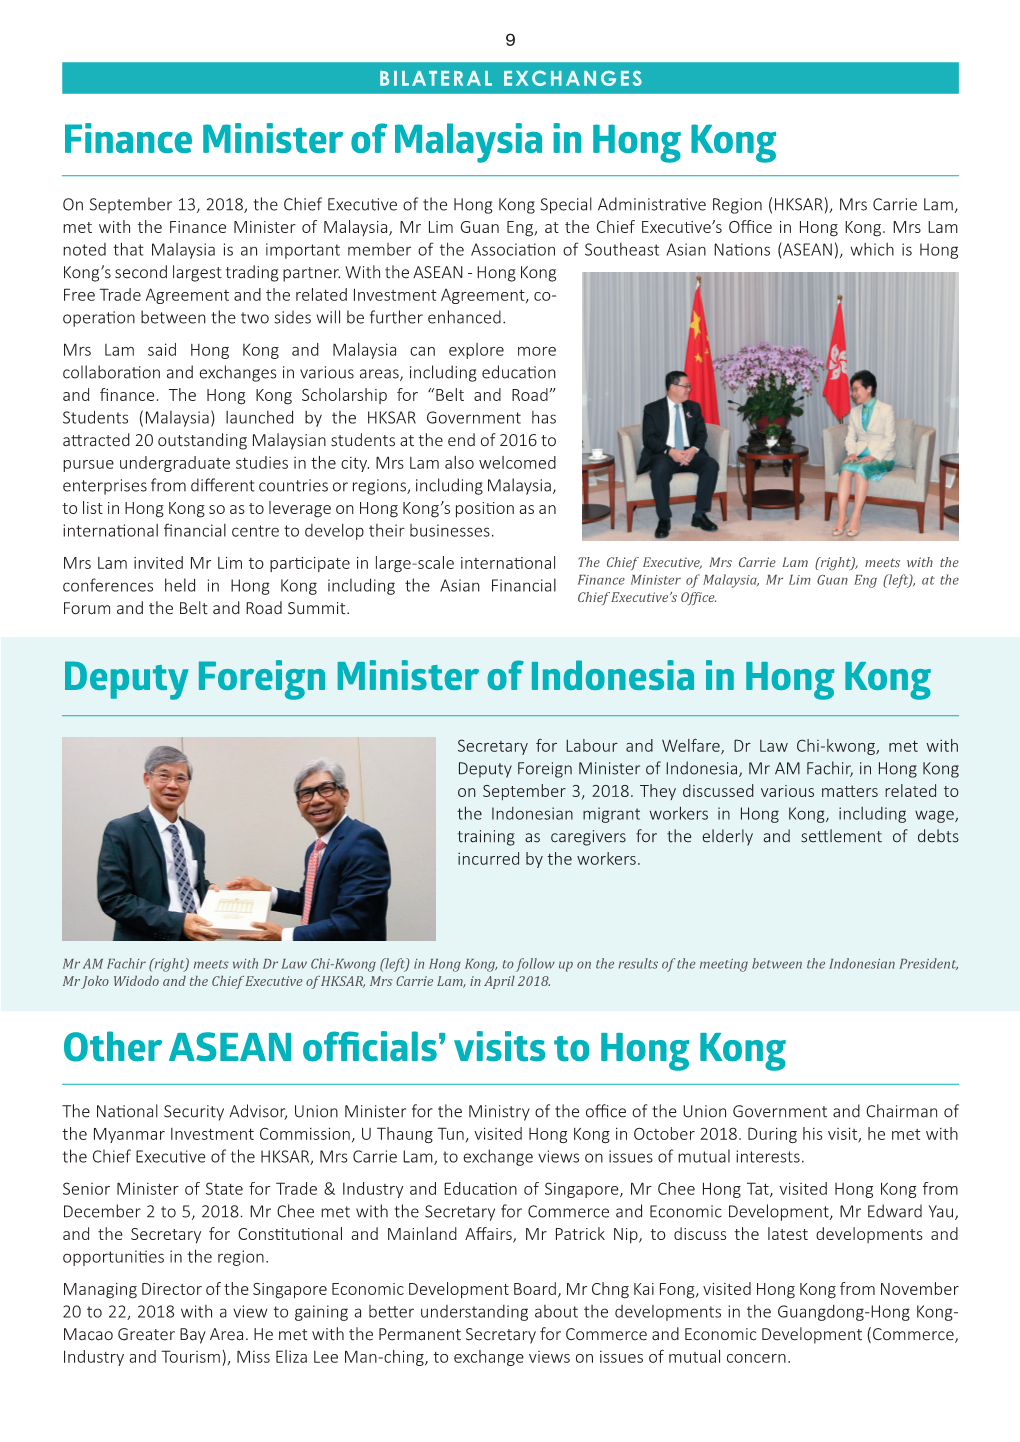 Deputy Foreign Minister of Indonesia in Hong Kong Other ASEAN Officials' Visits to Hong Kong Finance Minister of Malaysia in H